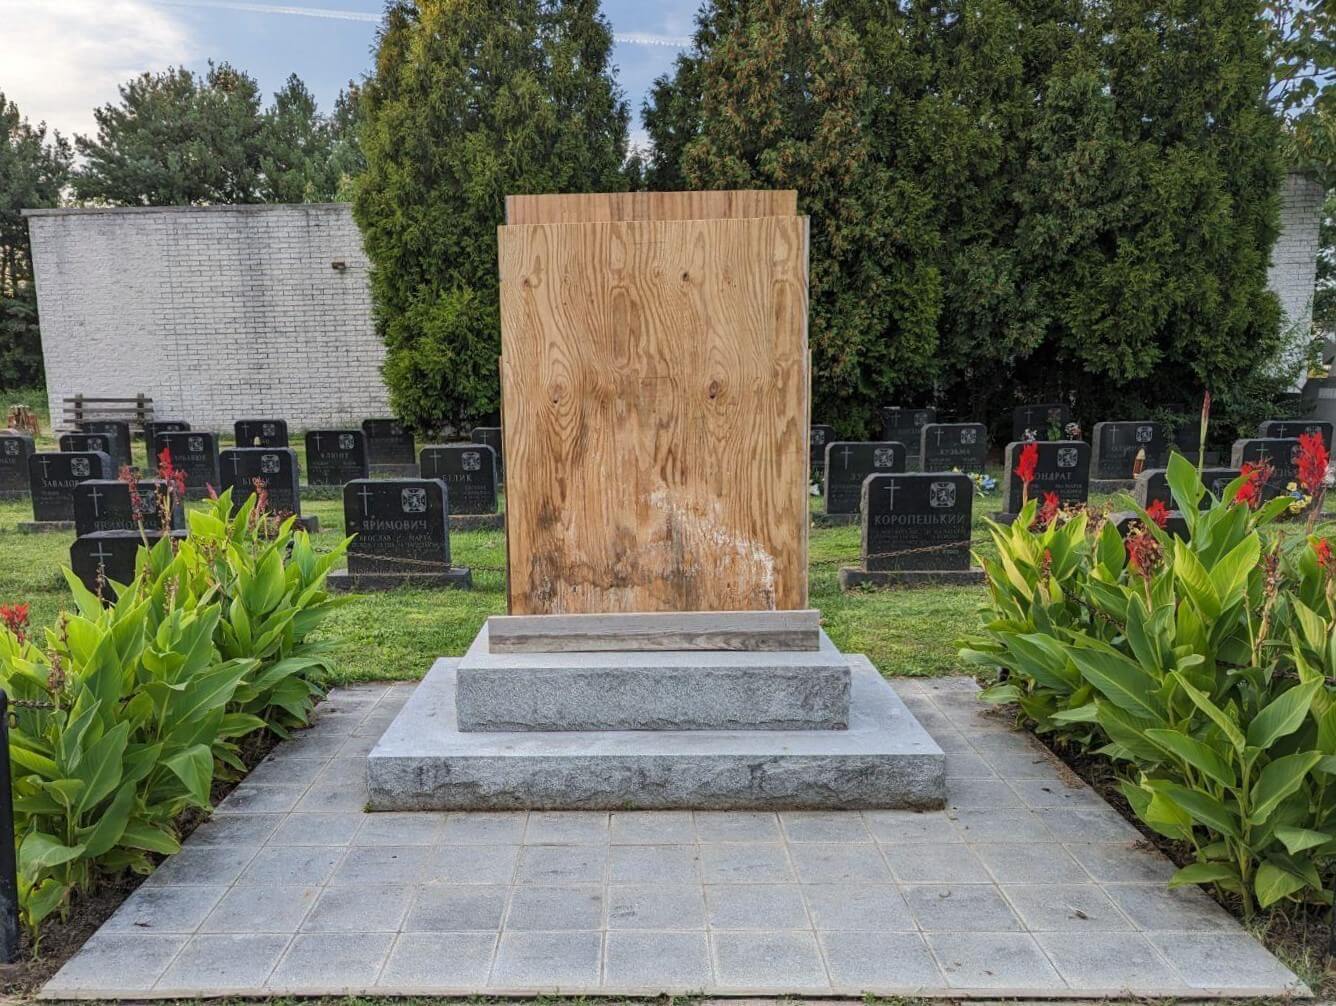 The monument, located in St. Mary’s Ukrainian Catholic Cemetery in Elkins Park, Pennsylvania, bears the divisional insignia of the 14th Waffen Grenadier Division of the SS.